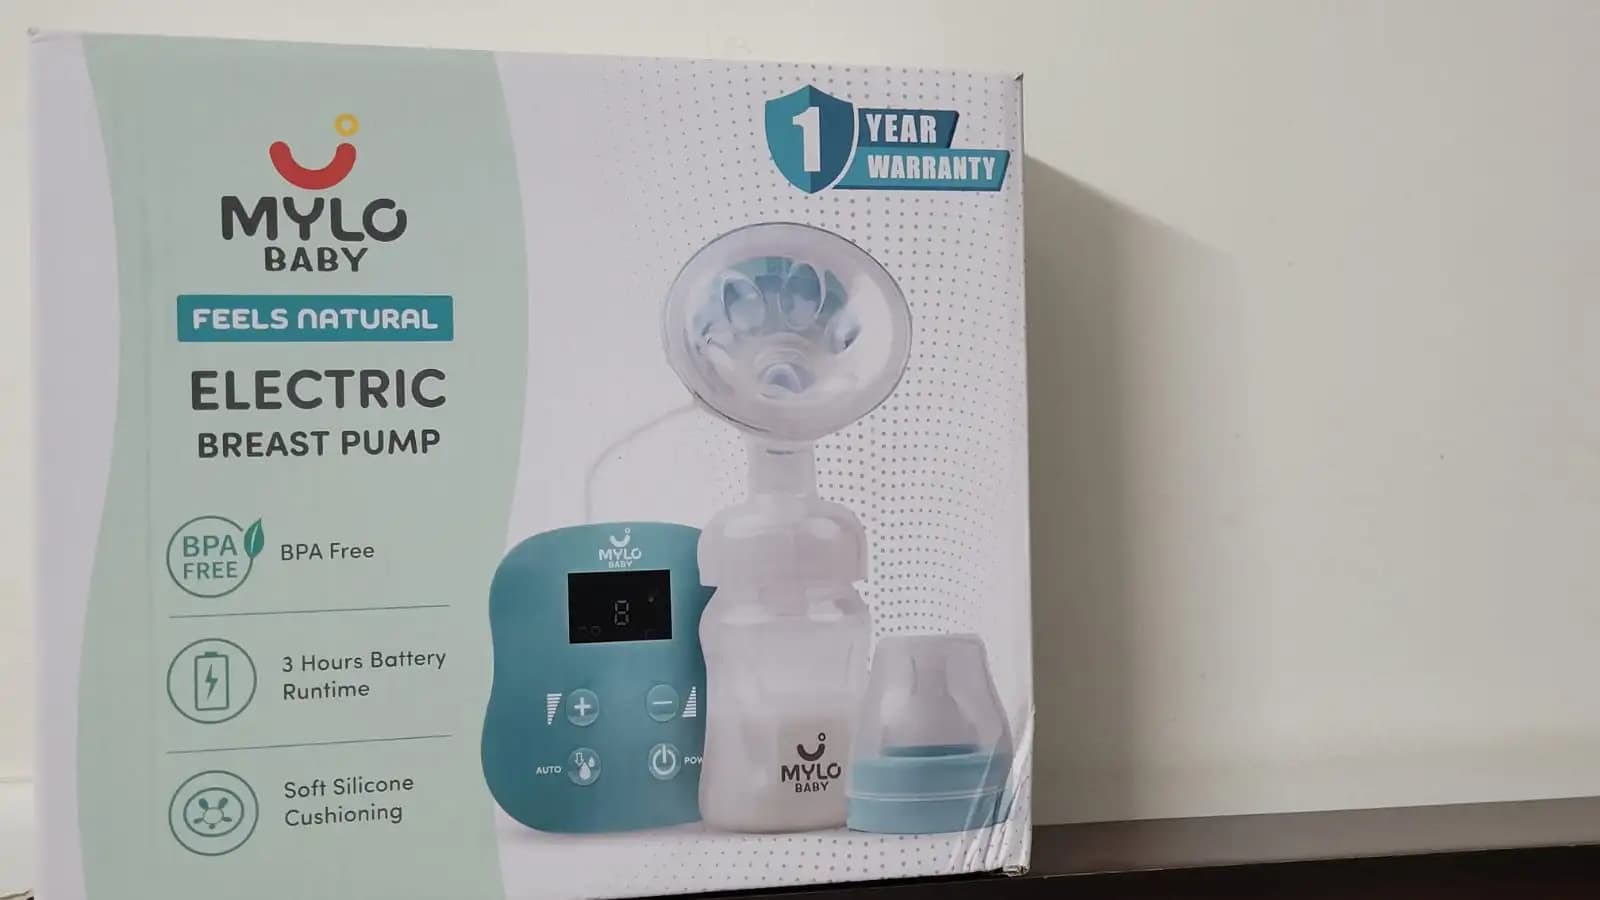 Electric Breast Pump | BPA Free | 3 Hours Battery Runtime | Soft Silicone Cushioning | Portable | 9 Level Intensity Adjustment